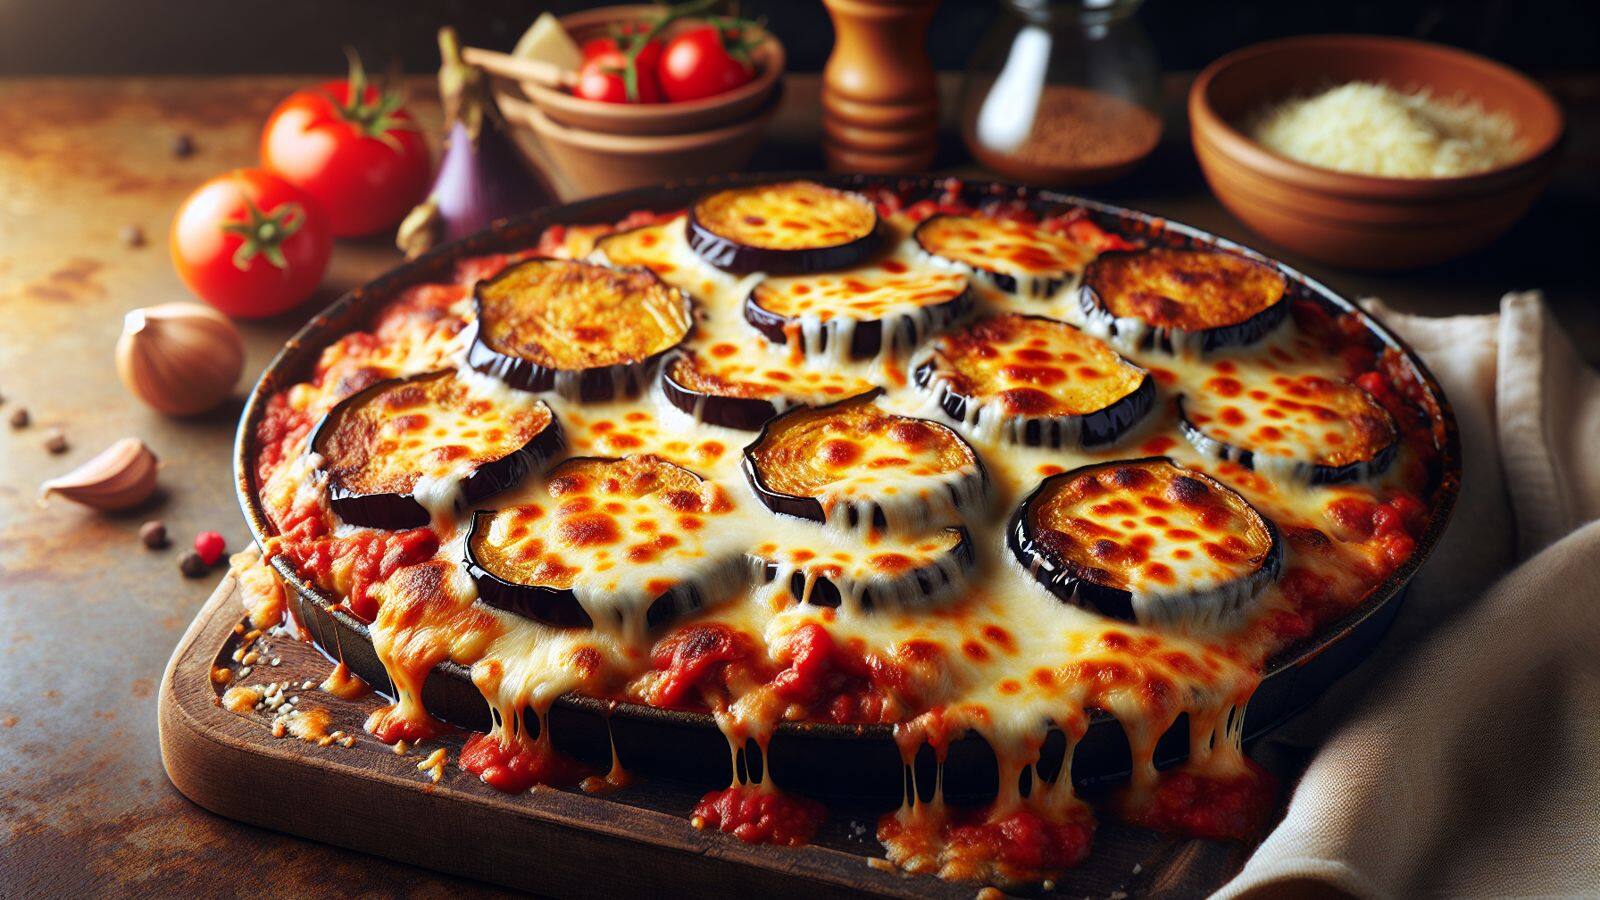 Try this eggplant Parmesan casserole recipe for a flavorsome day